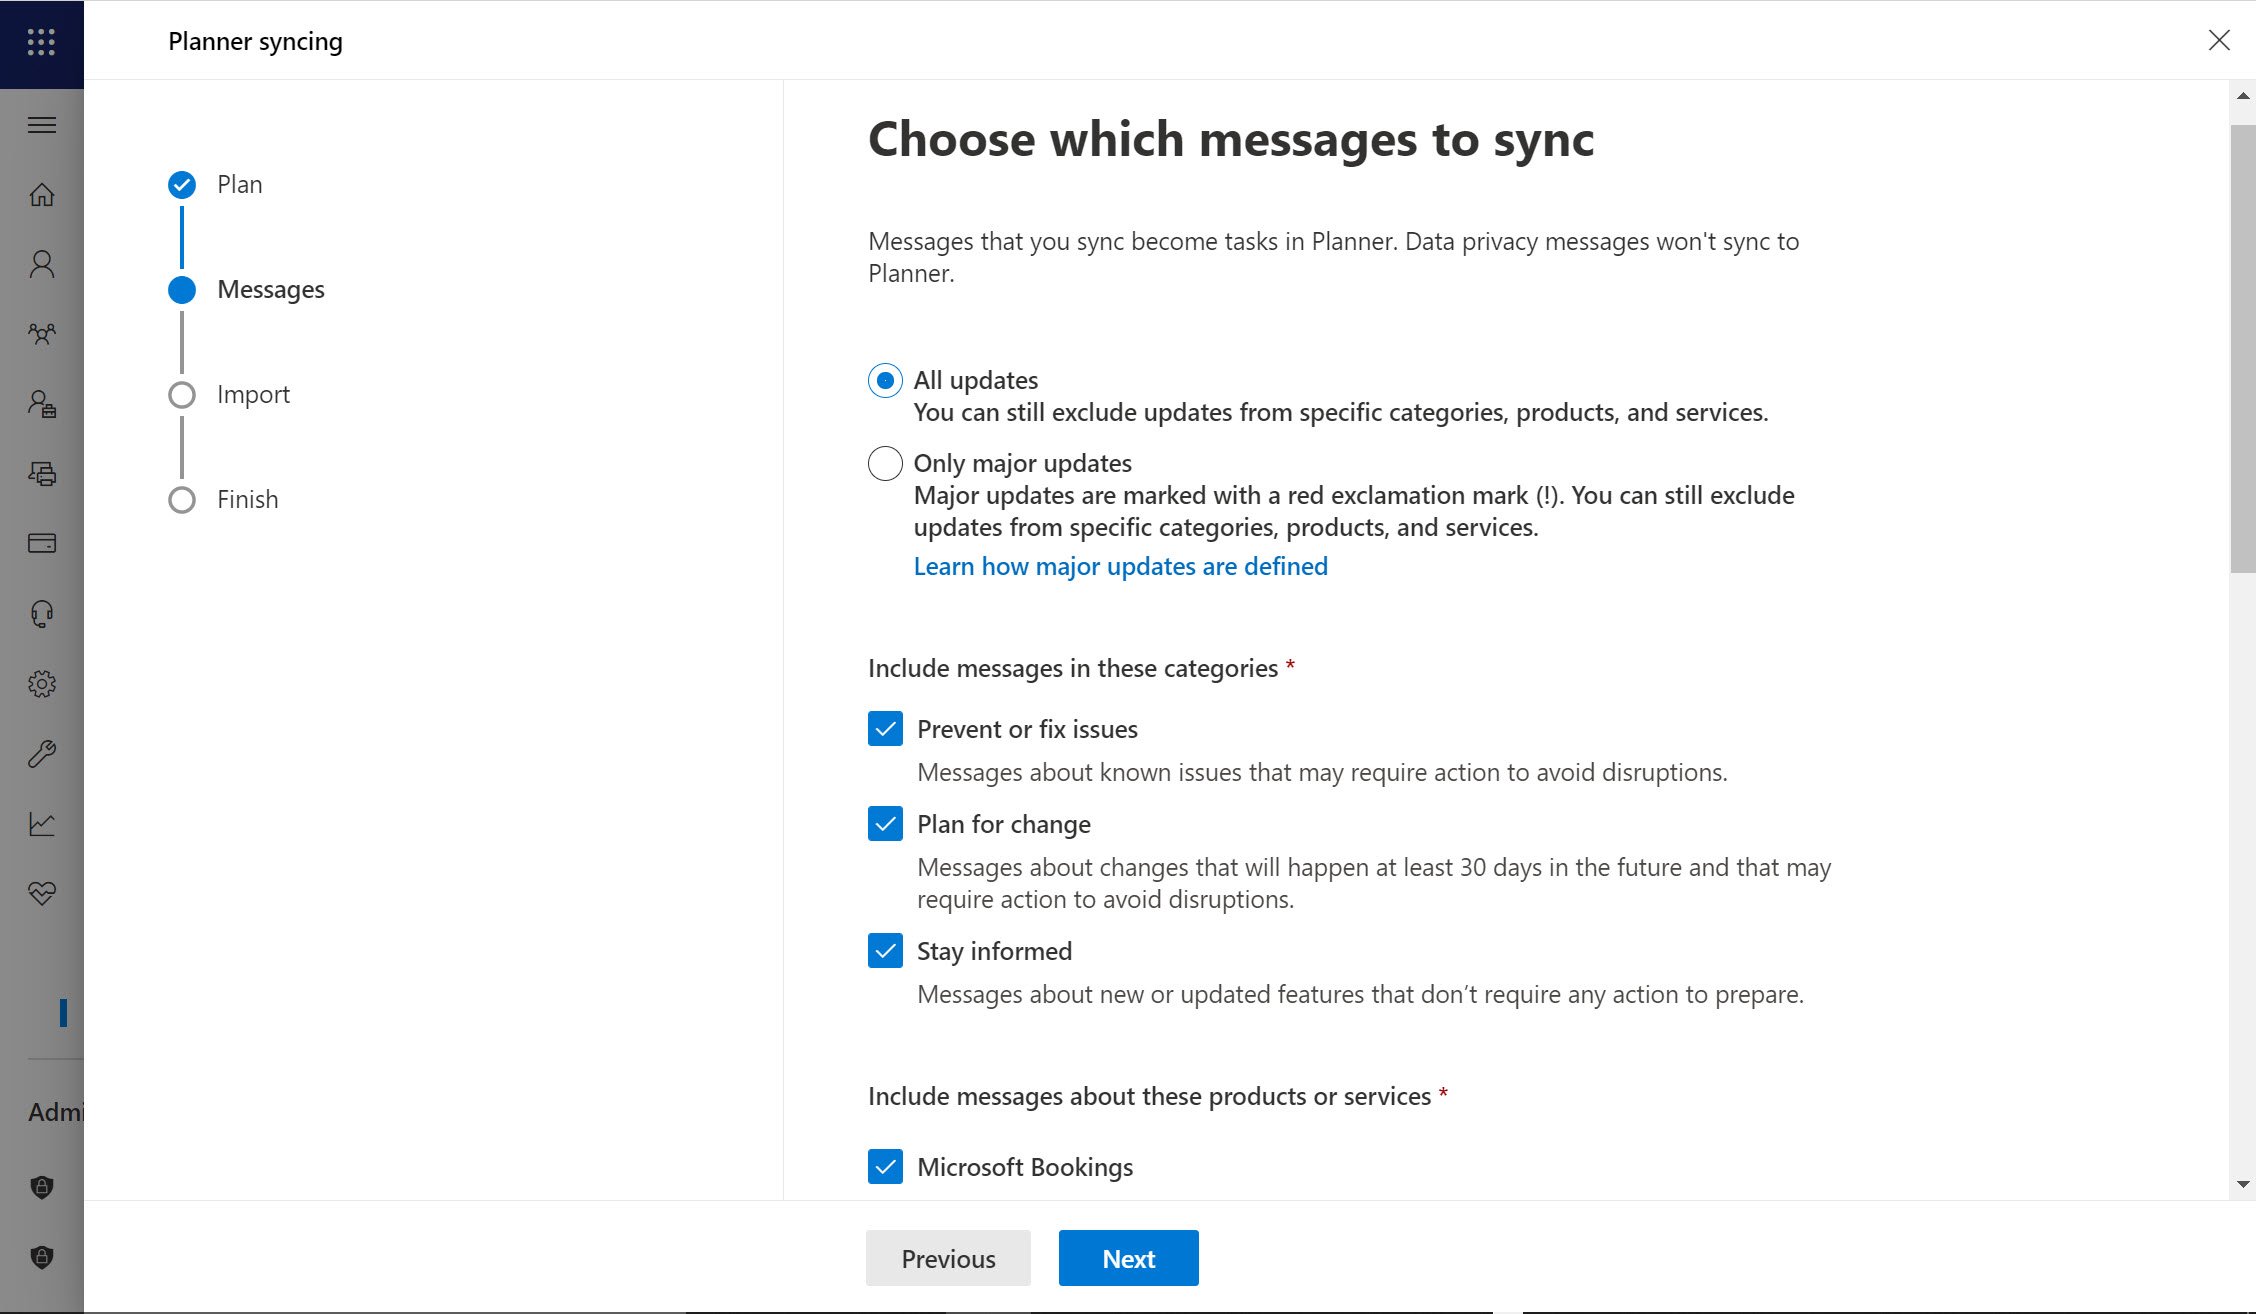 Choose which messages to sync.